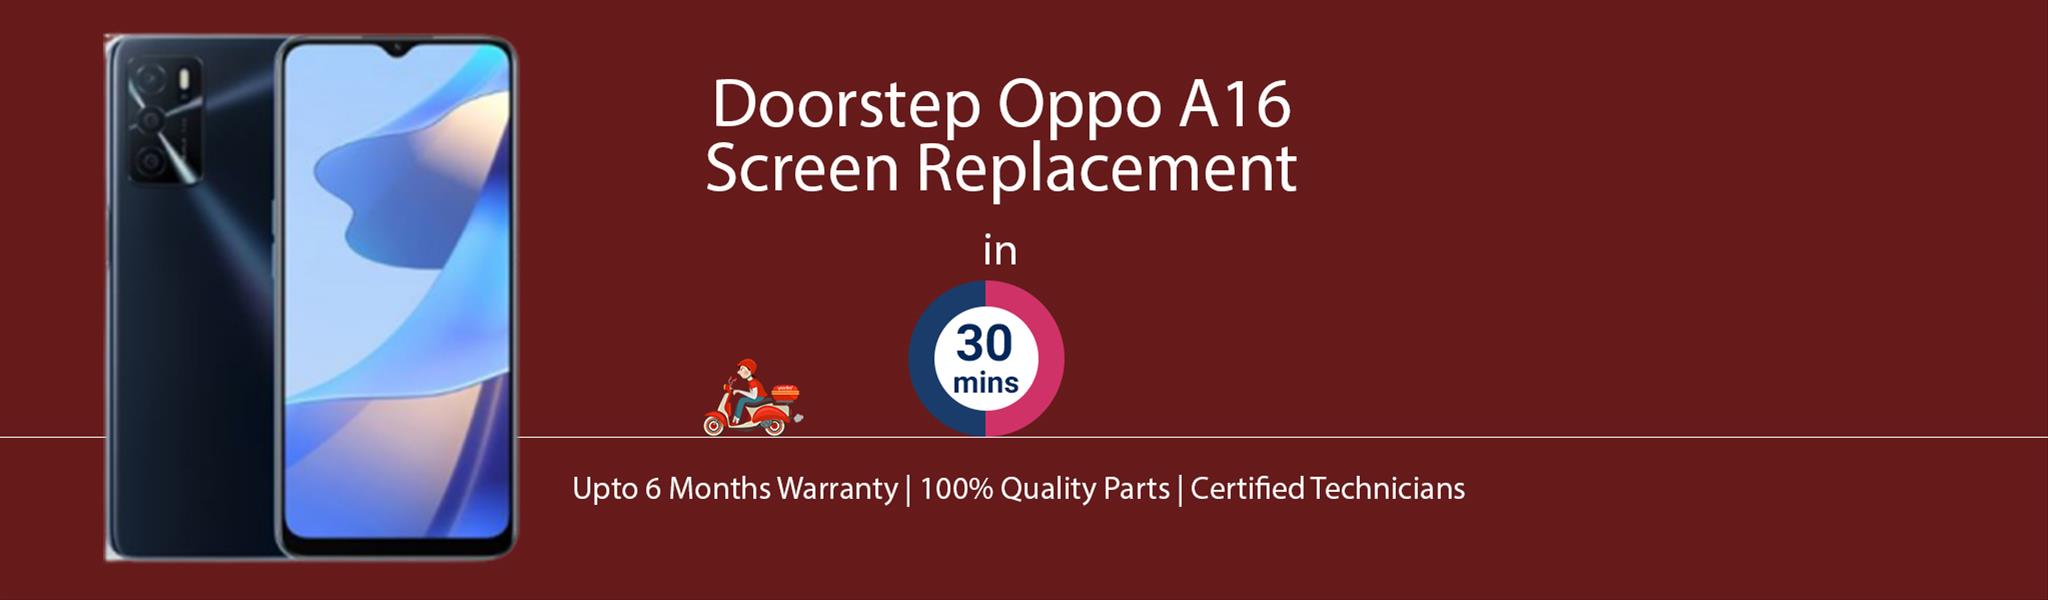 oppo-a16-screen-replacement.jpg